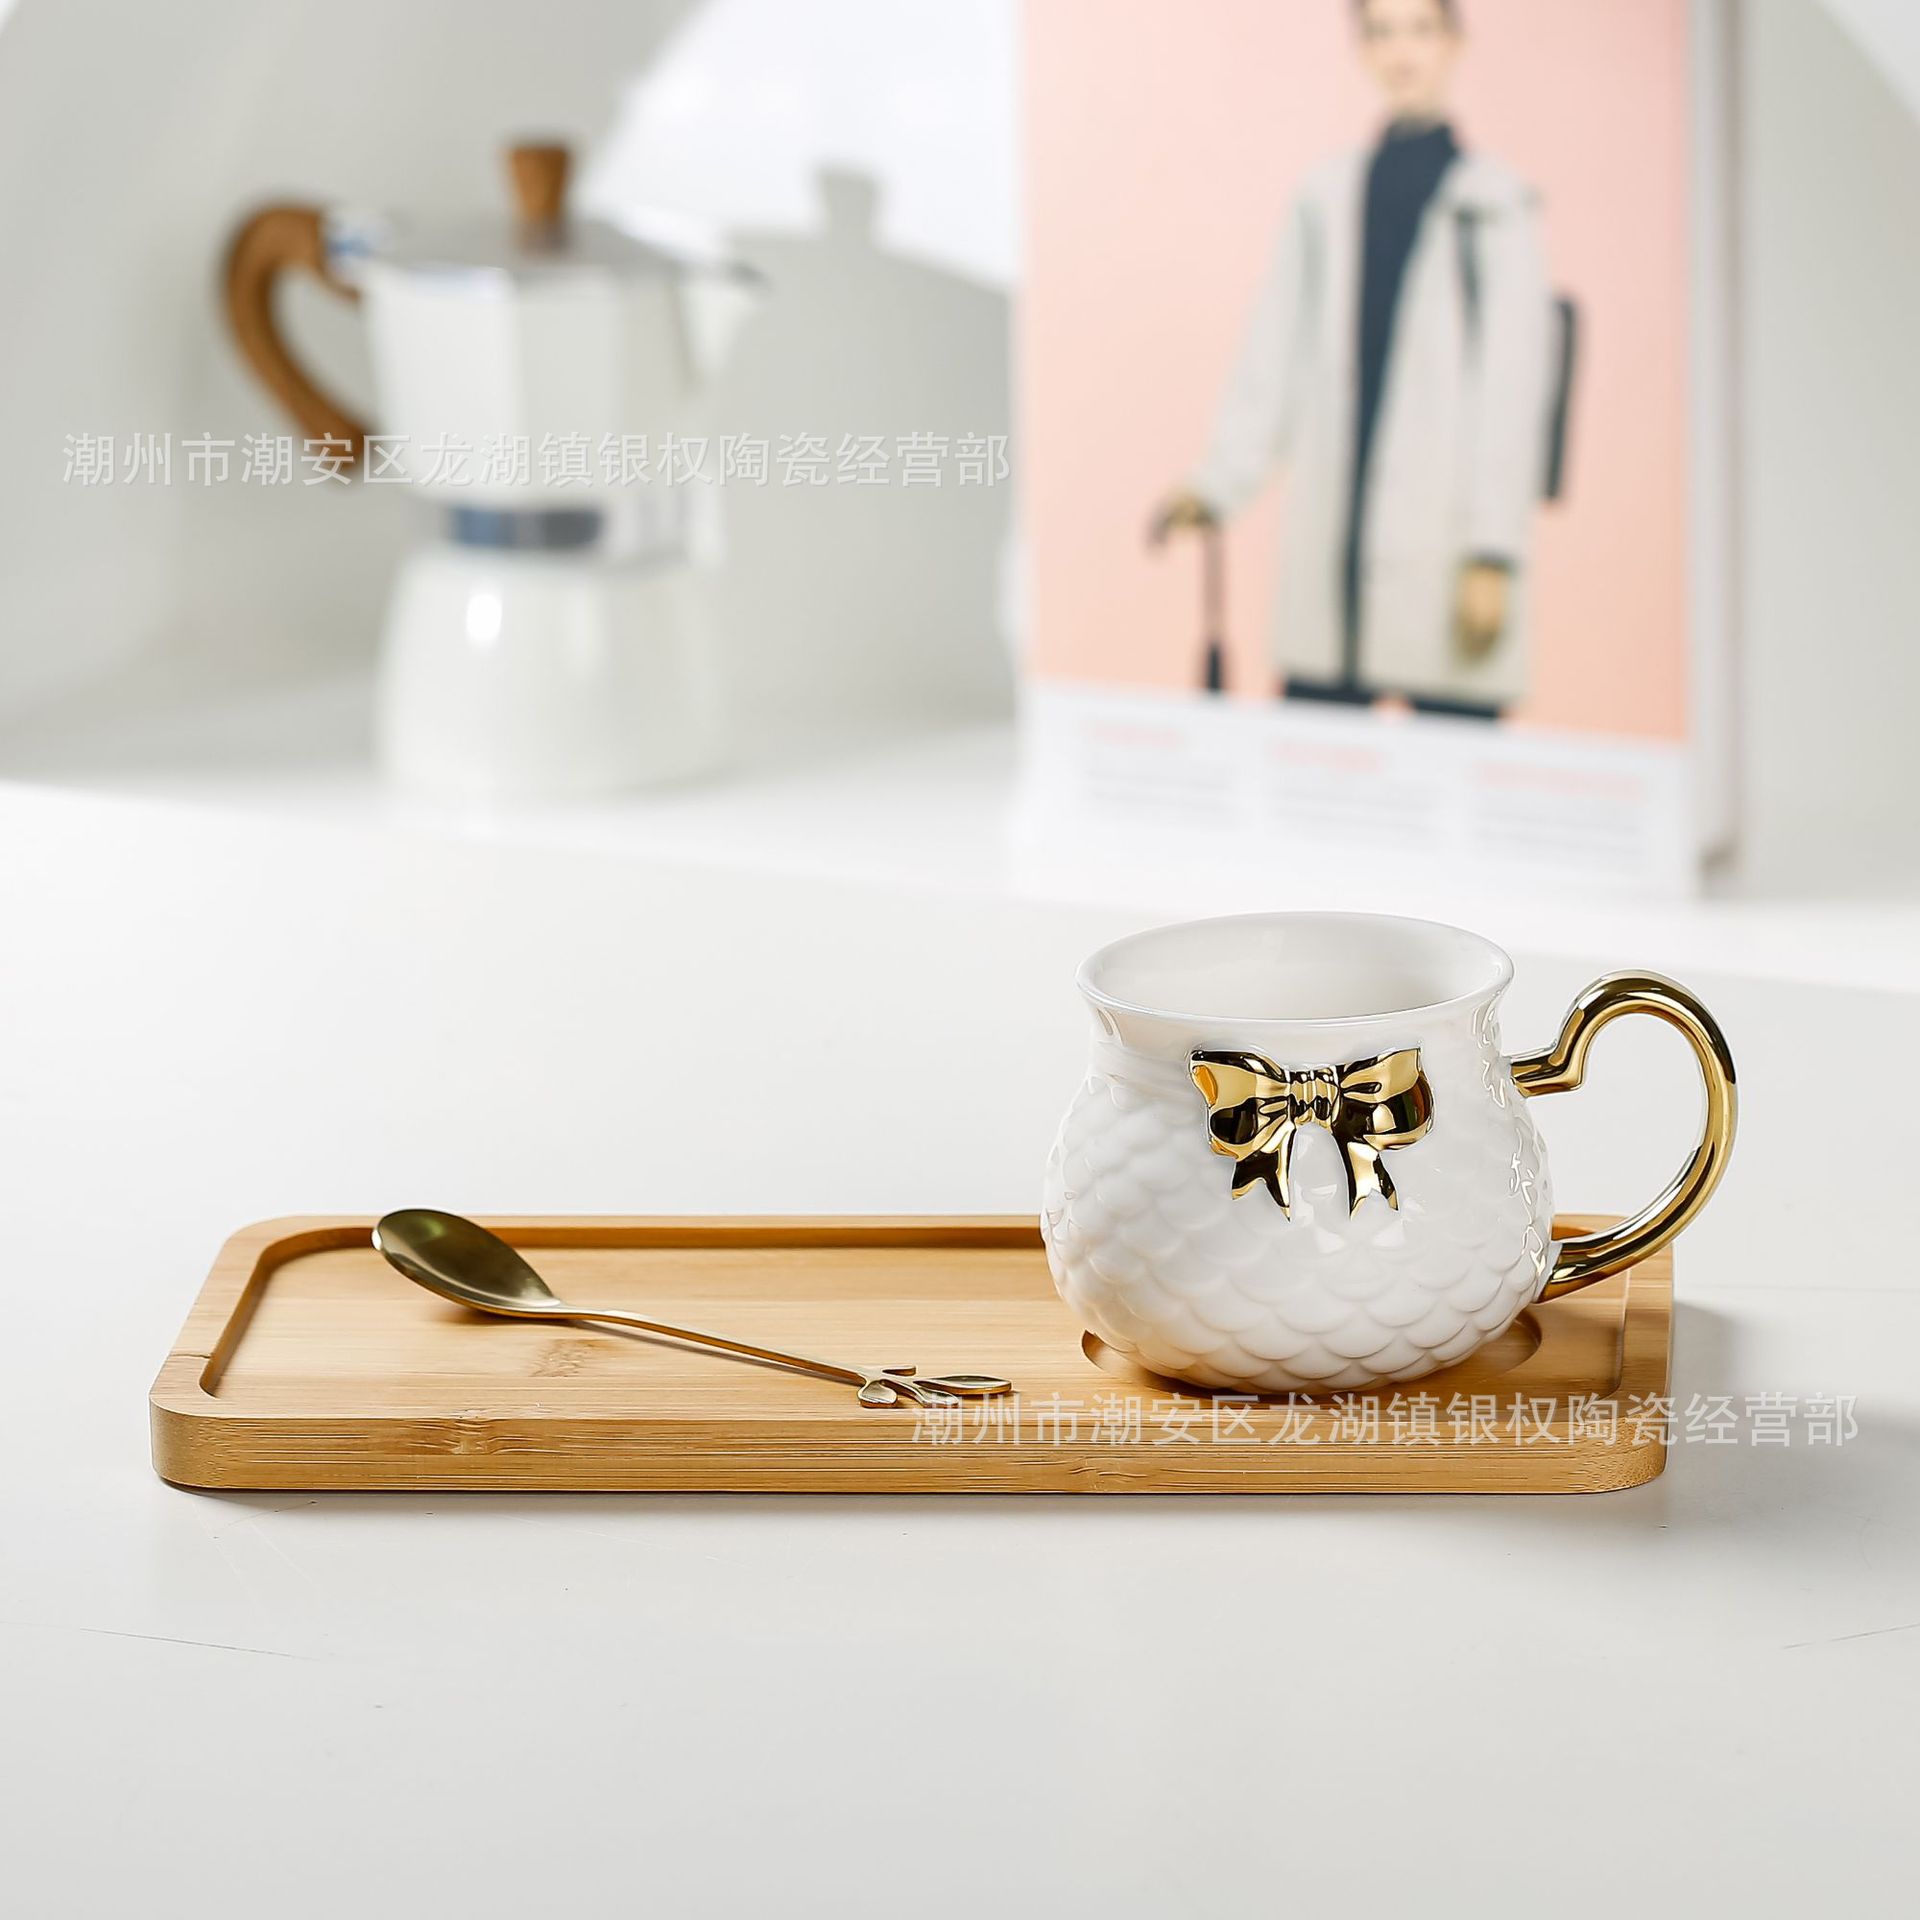 New Ceramic Cup Dish Gold Handle Coffee Set Set Lucky Bag Mug Golden Edge Tray with Spoon Business Jewelry Gift